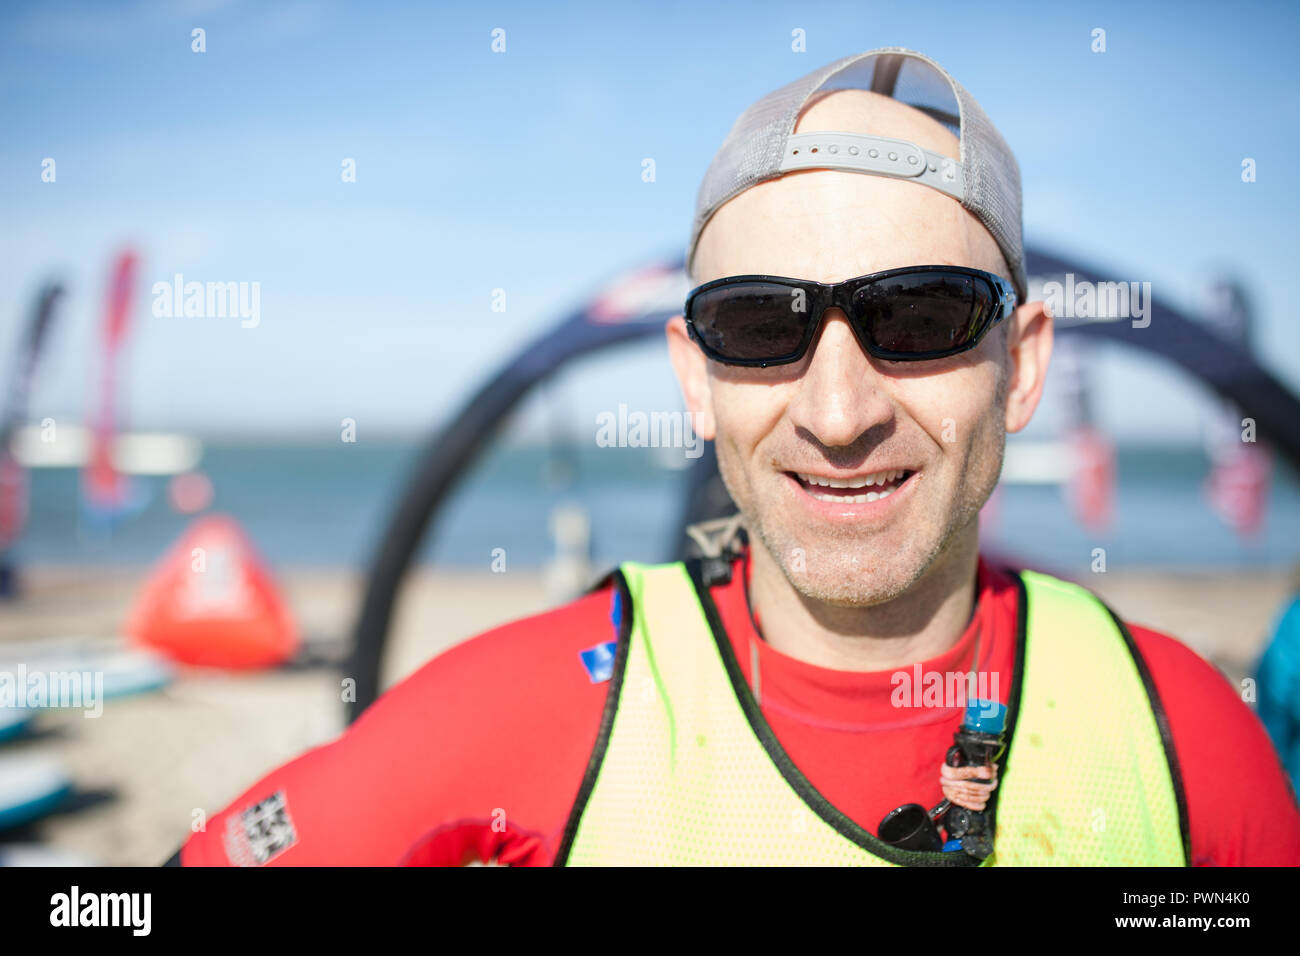 Portrait of a paddle boarder after a race Stock Photo